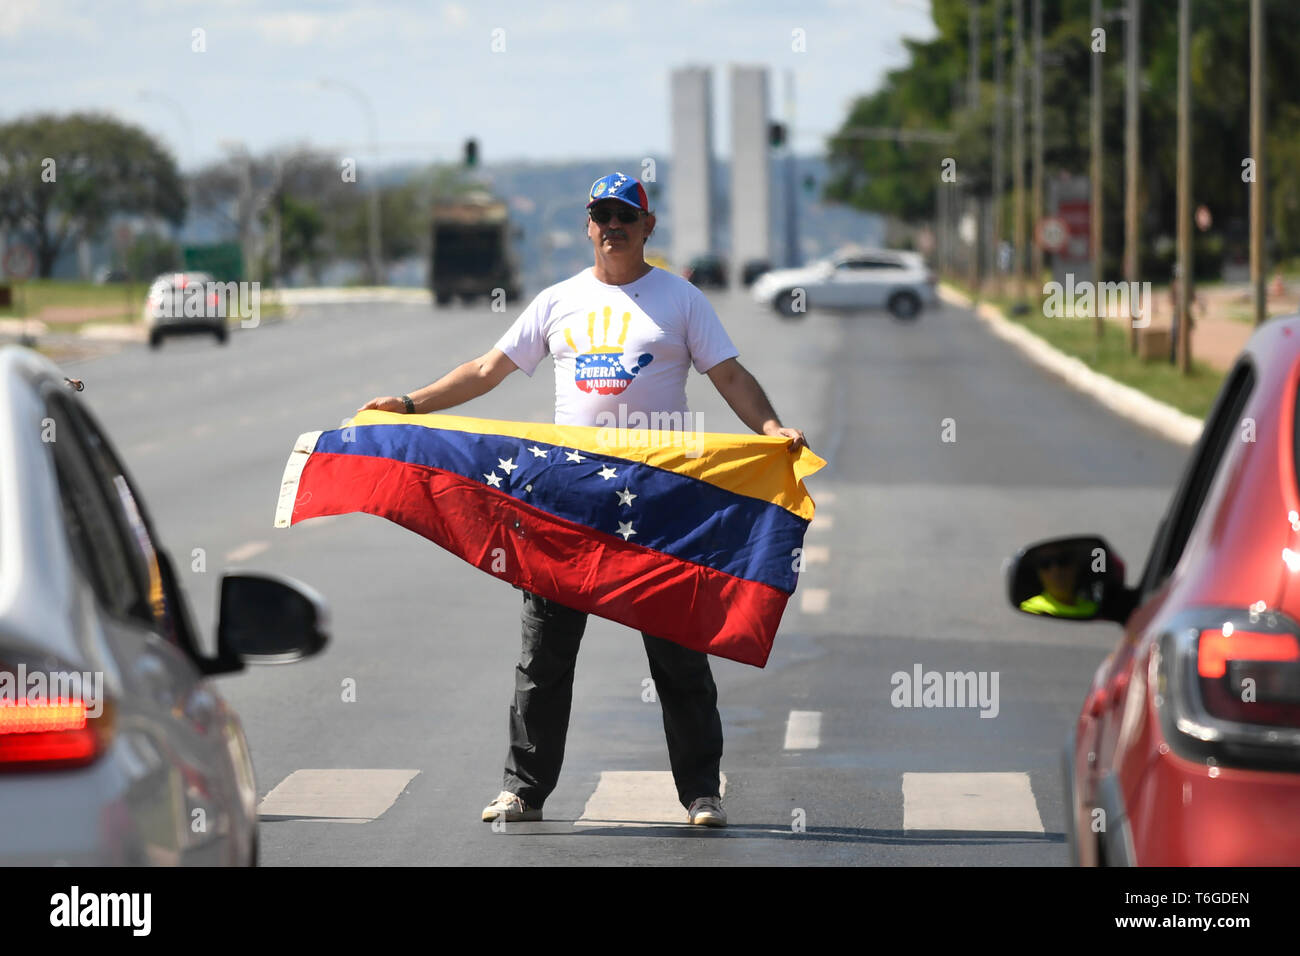 Brasilia, Brazil. 1st May 2019. Manifestation of support to Juan Guaido in Brasilia - Supporters of the self-proclaimed Acting President of Venezuela Juan Guaido, held a demonstration this Saturday, May 1st, in the Monumental Axis near the City Park, They ask for the departure of President Nicolas Maduro. Venezuela faces a crisis unprecedented in its history, according to the IMF, hyperinflation may reach 10 million percent in 2019, the unemployment rate exceeds 40 percent, thousands are starving, and there is a great fear of a civil war . Photo: Mateus Bonomi/AGIF Credit: AGIF/Alamy Live News Stock Photo